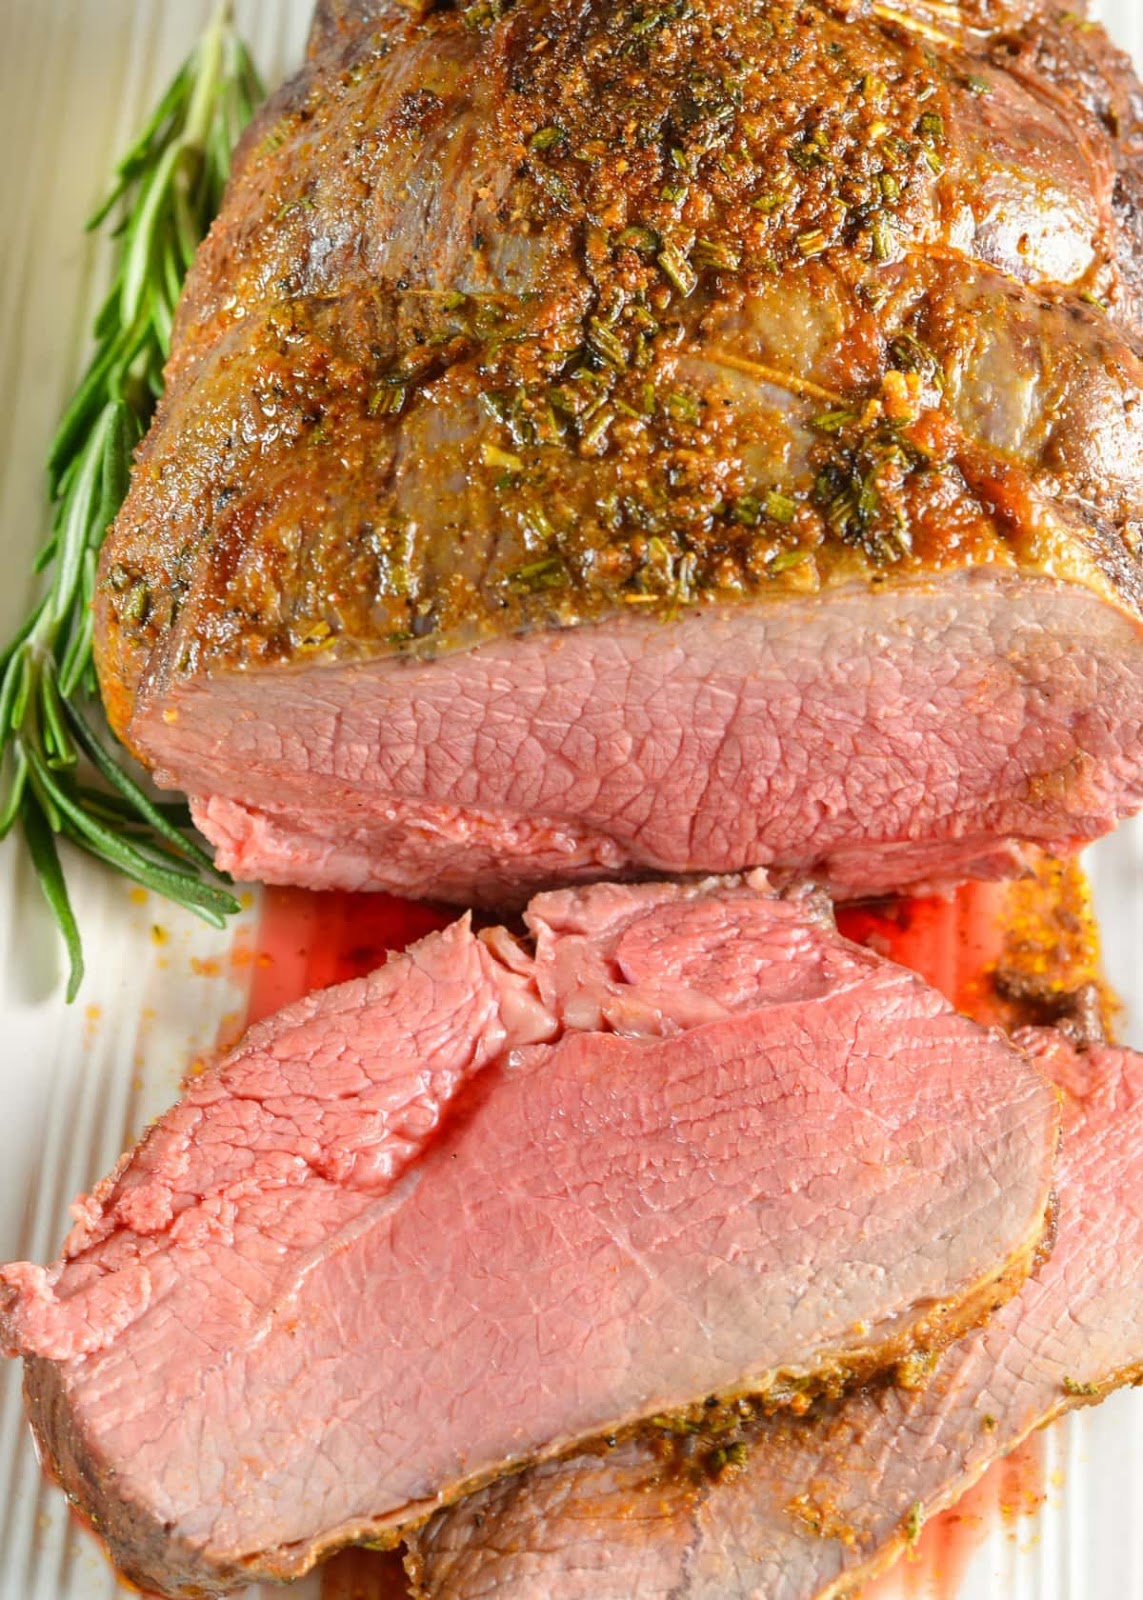 Sliced Sirloin Tip Roast on a platter from Serena Bakes Simply From Scratch.